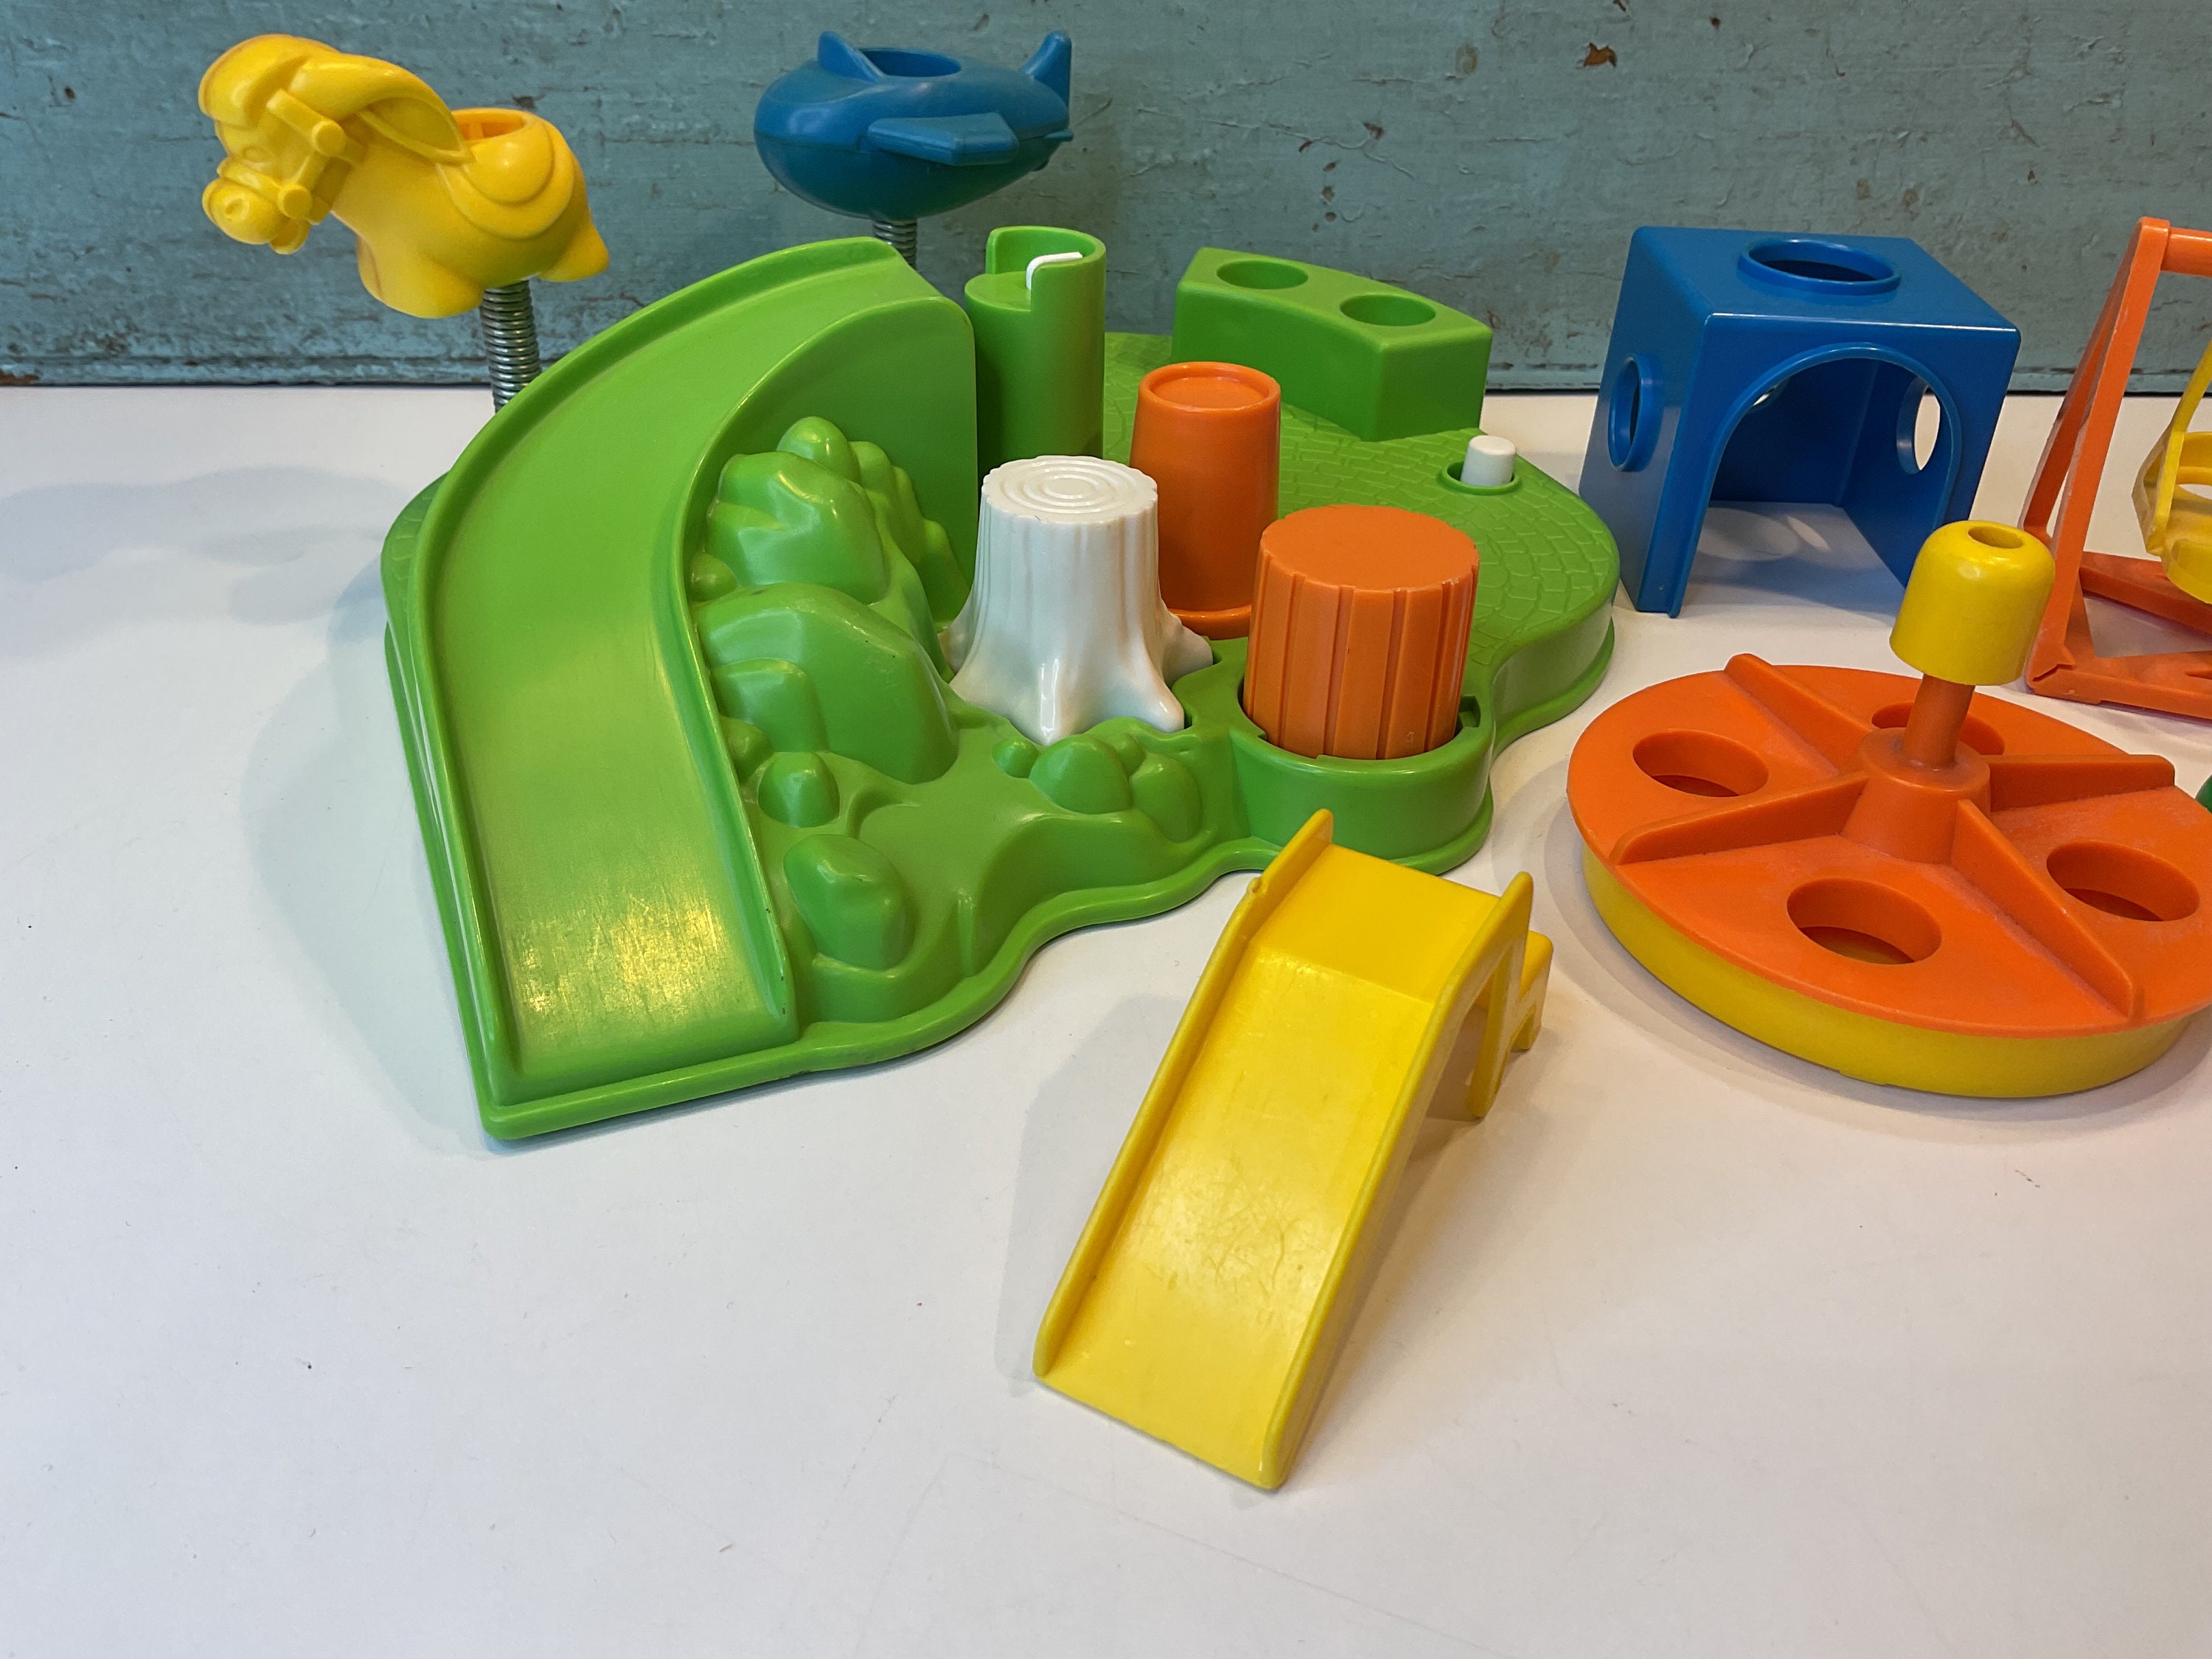 Buy Vintage Fisher Price Playground W People Online in India 